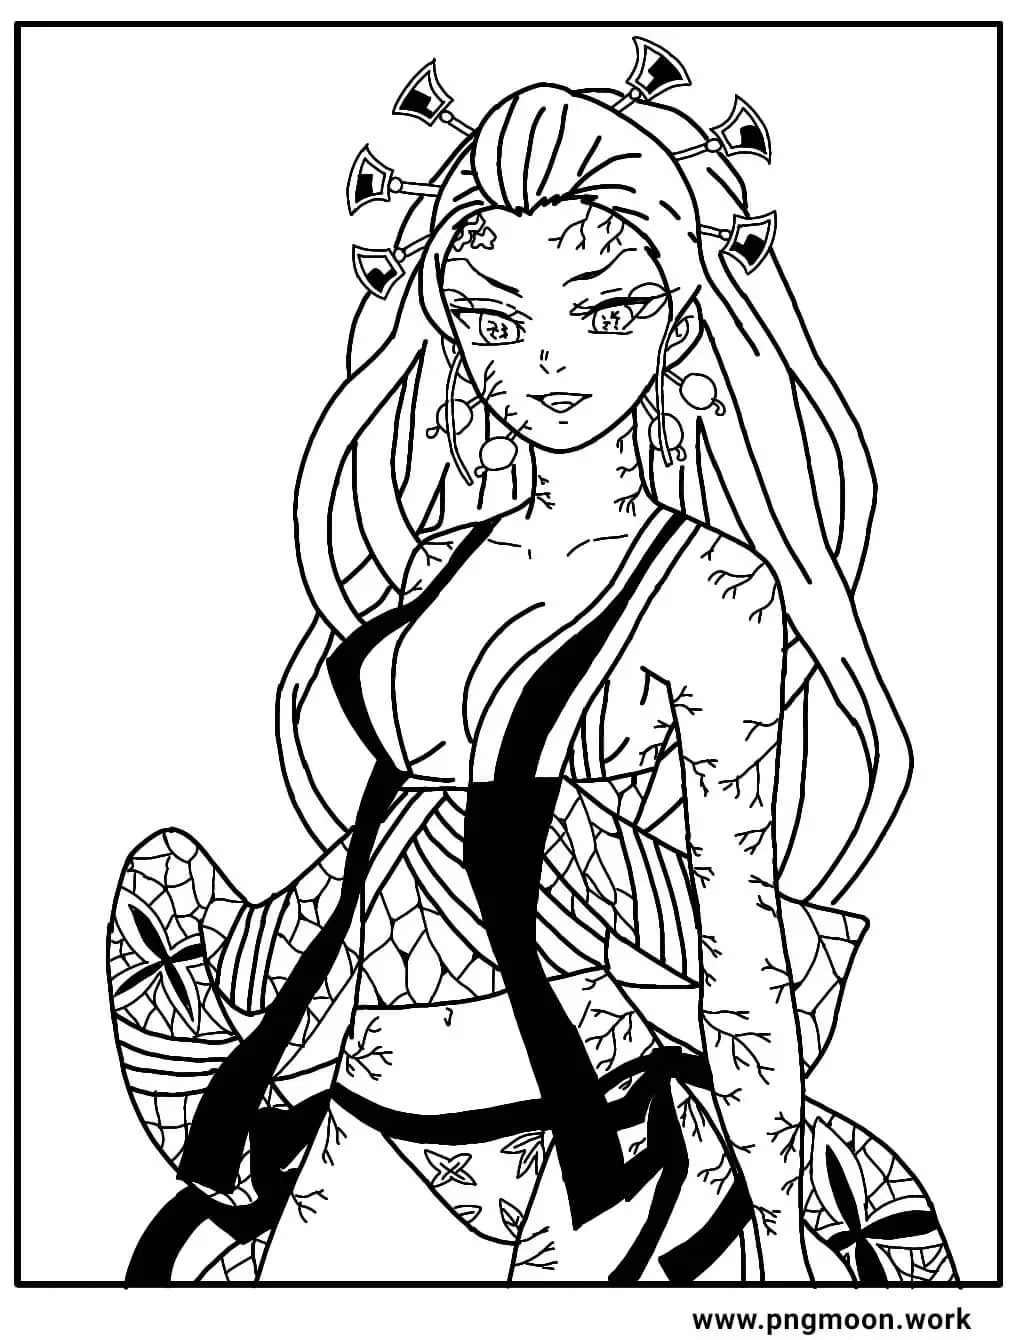 Daki Coloring Pages, Demon Slayer - Pngmoon- PNG images, Coloring Pages